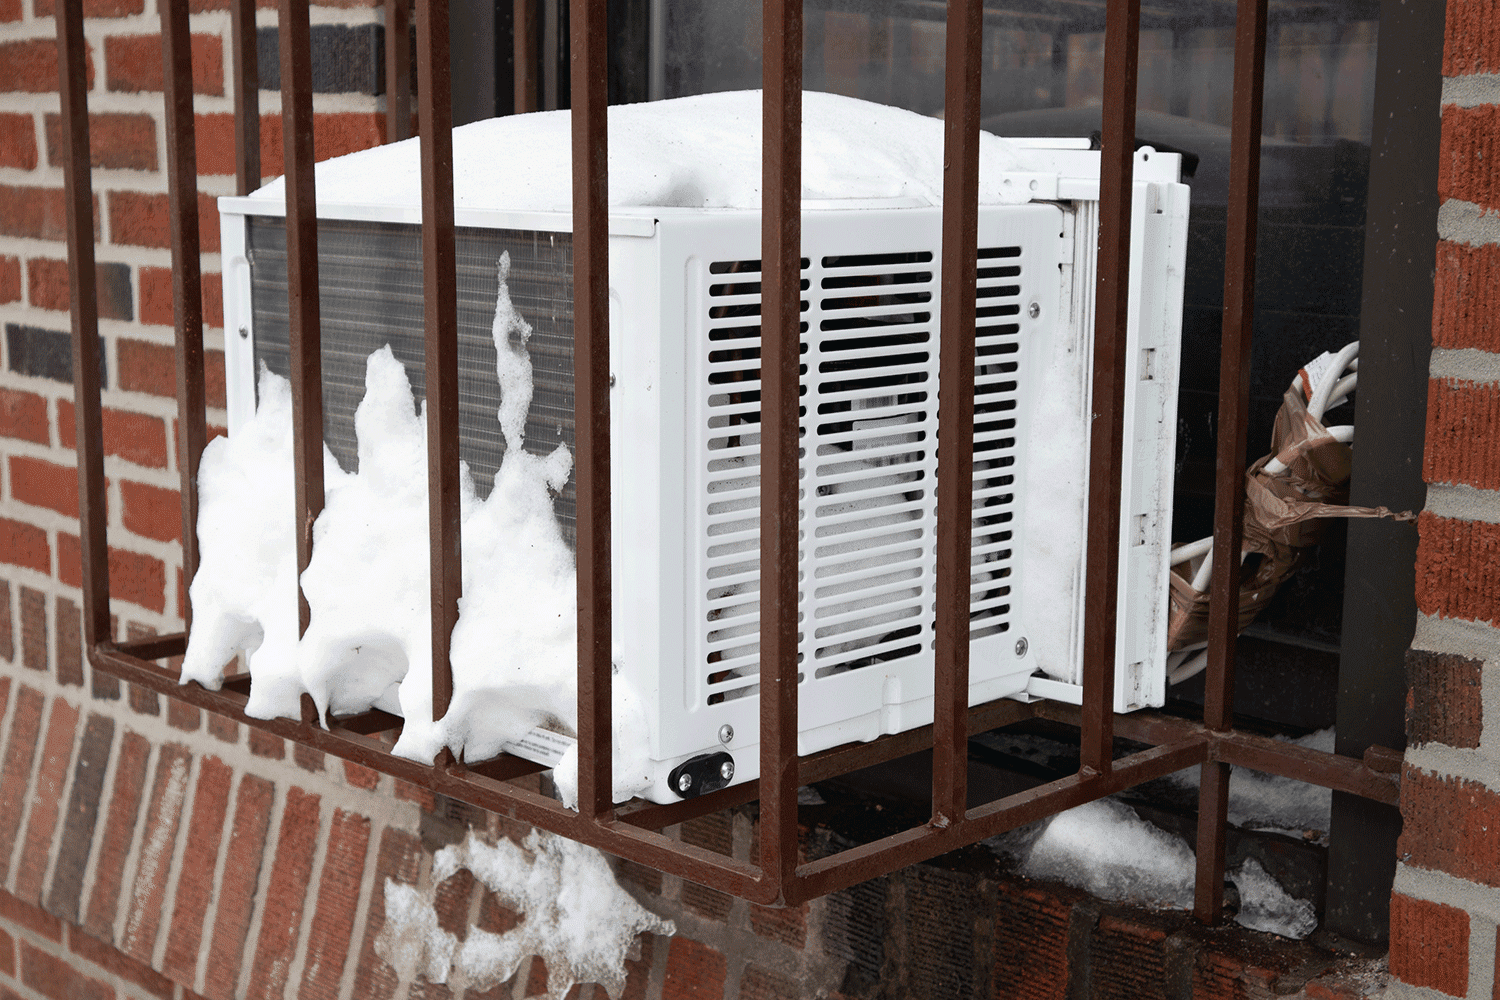 Window air conditioner in a barred cage with snow